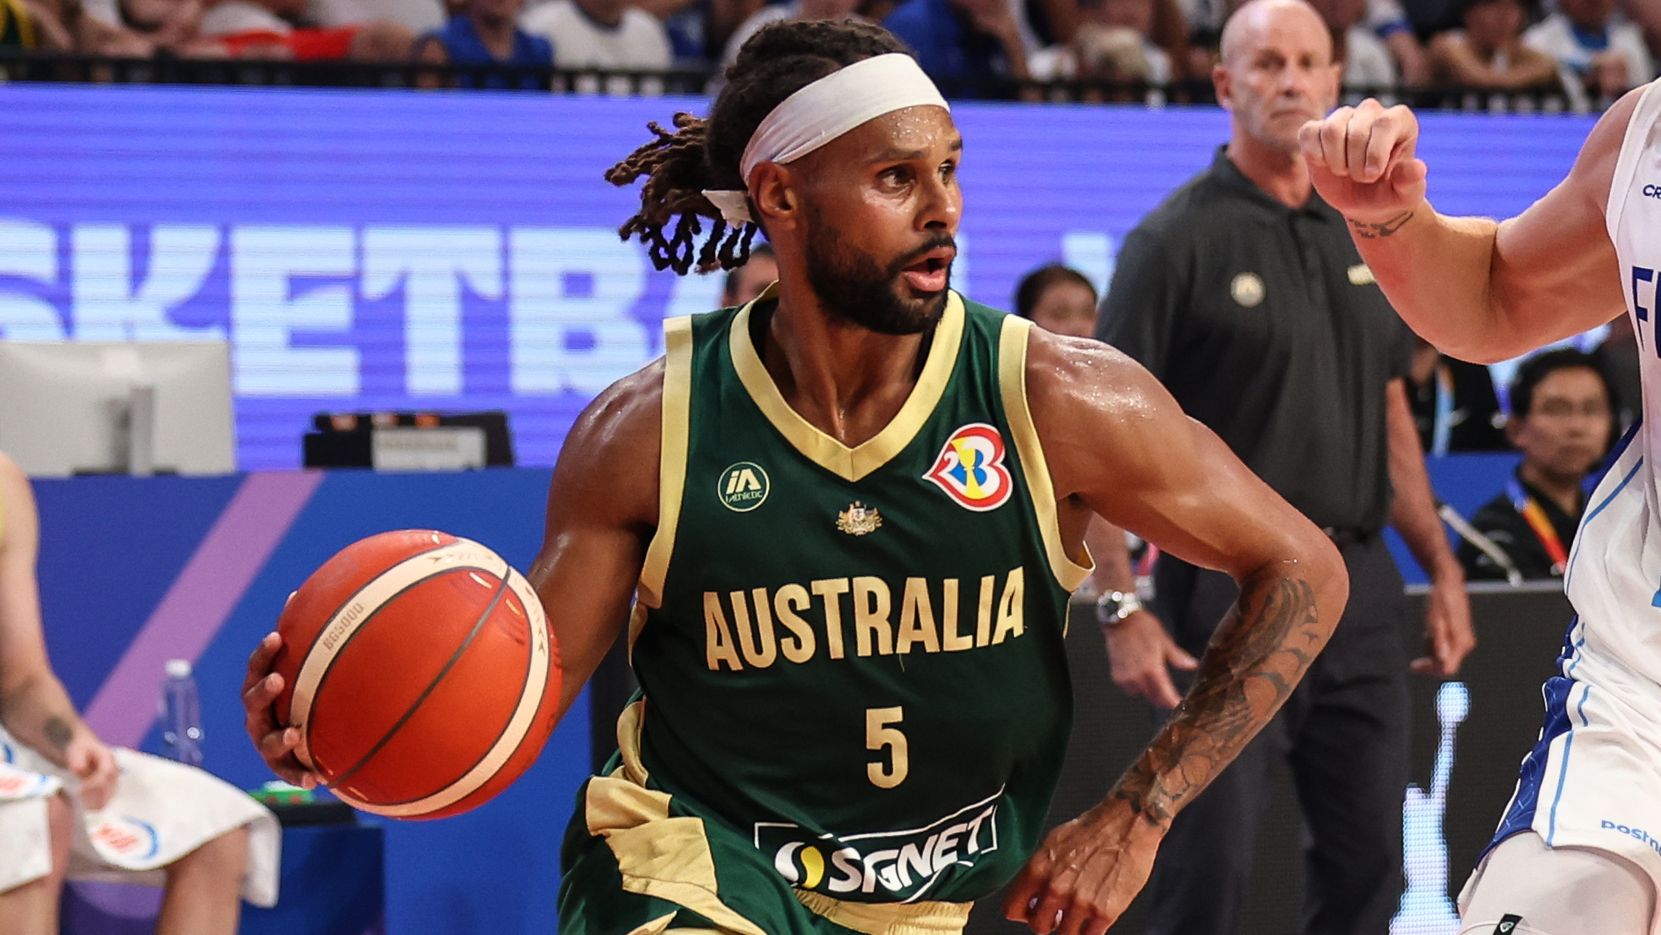 Patty Mills drives to the basket against Alex Murphy of Finland.